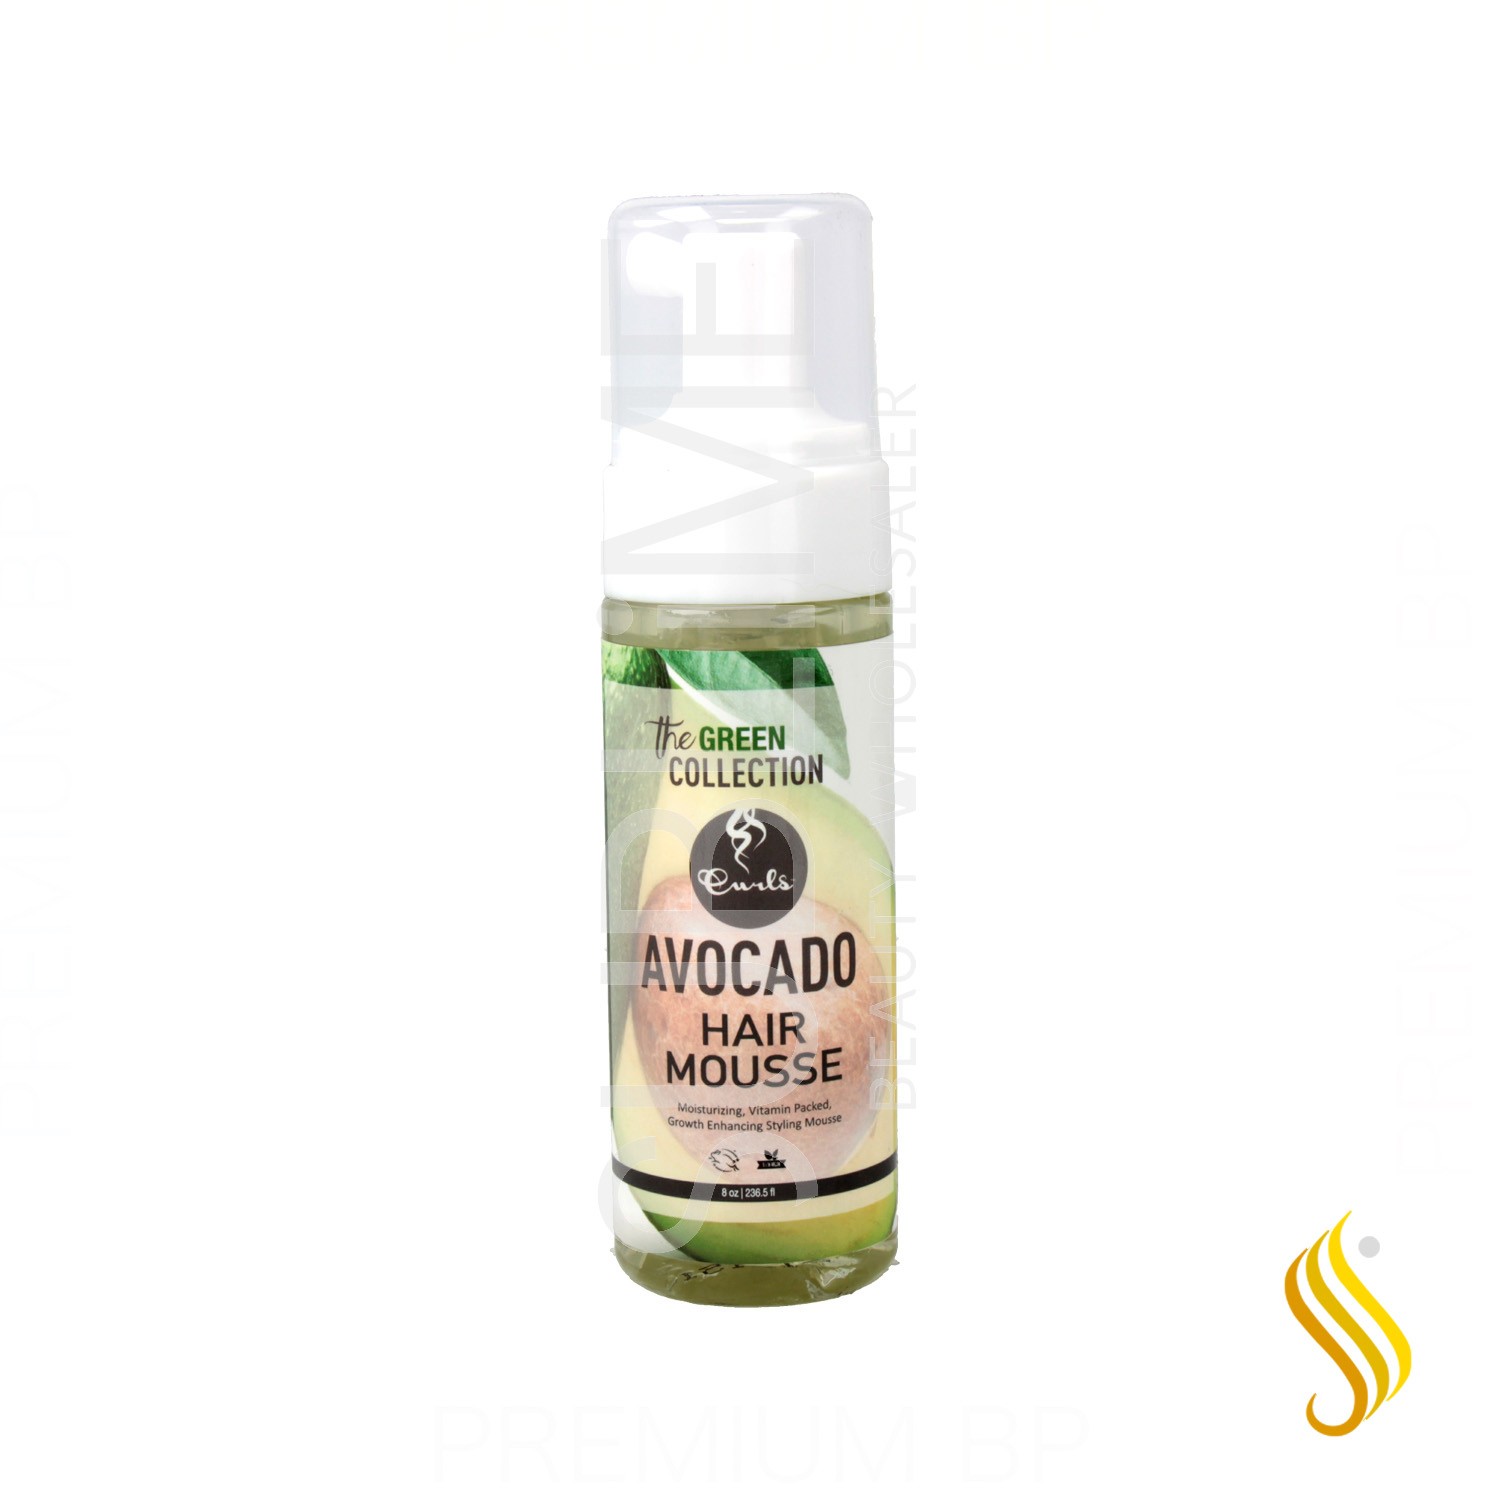 Curls The Green Collection Avocado Hair Mousse 236 ml